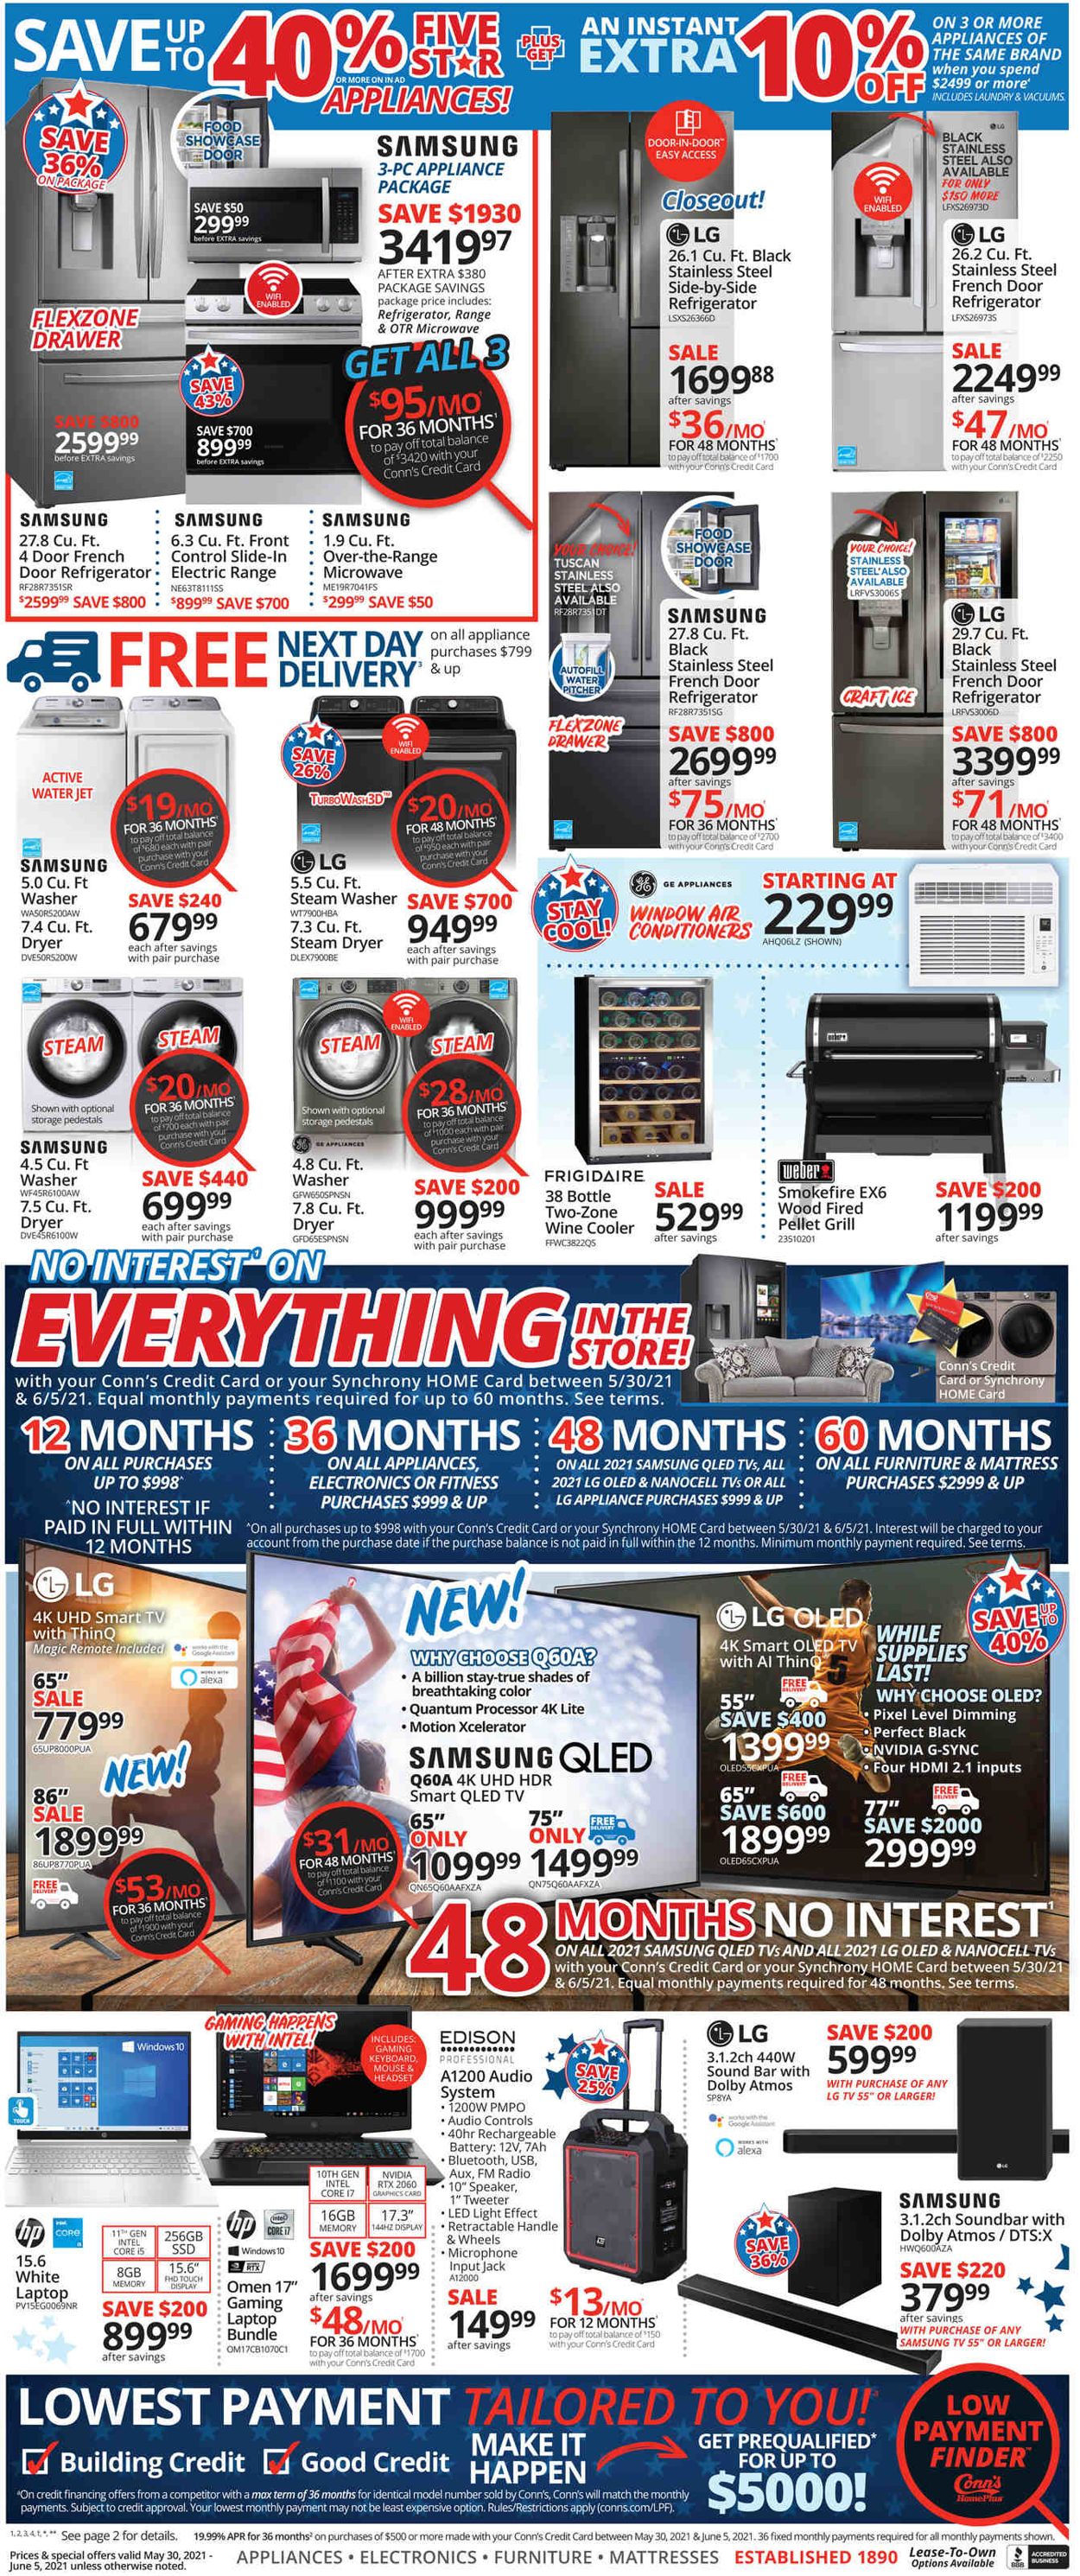 Conn's Home Plus Weekly Ad Circular - valid 05/30-06/05/2021 (Page 4)